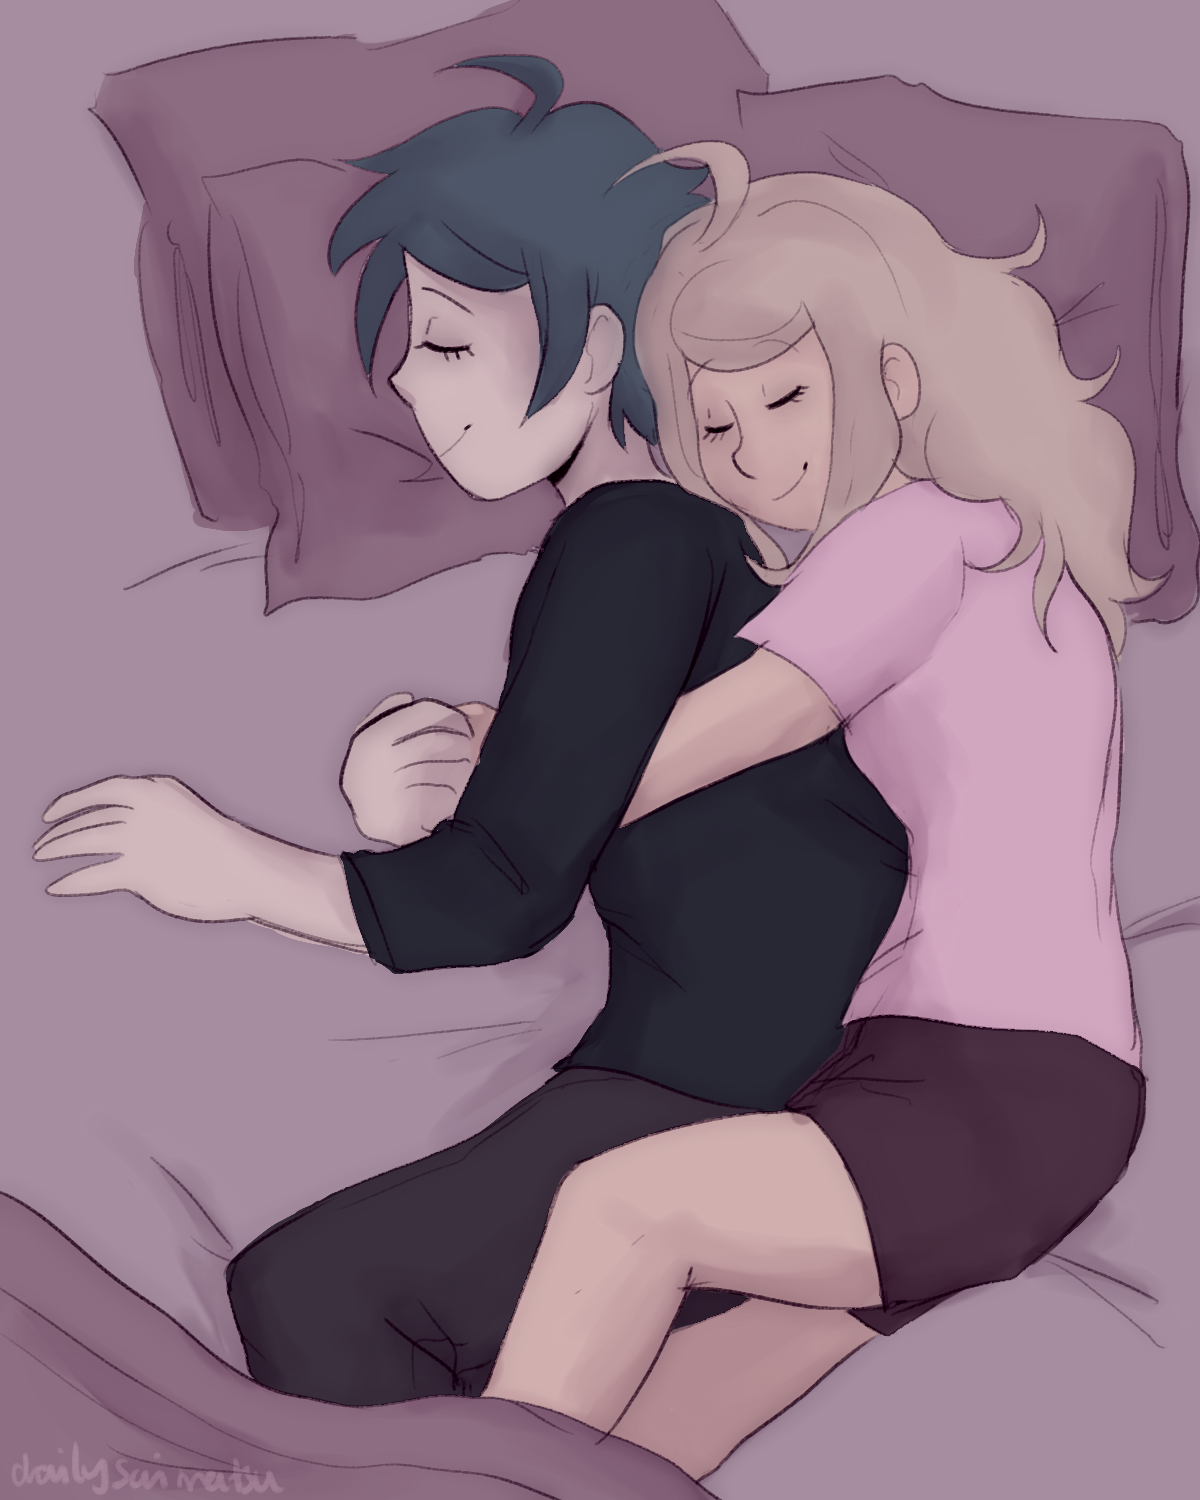 Weekly Saimatsu Drawings Important Question Who Is The Big Spoon